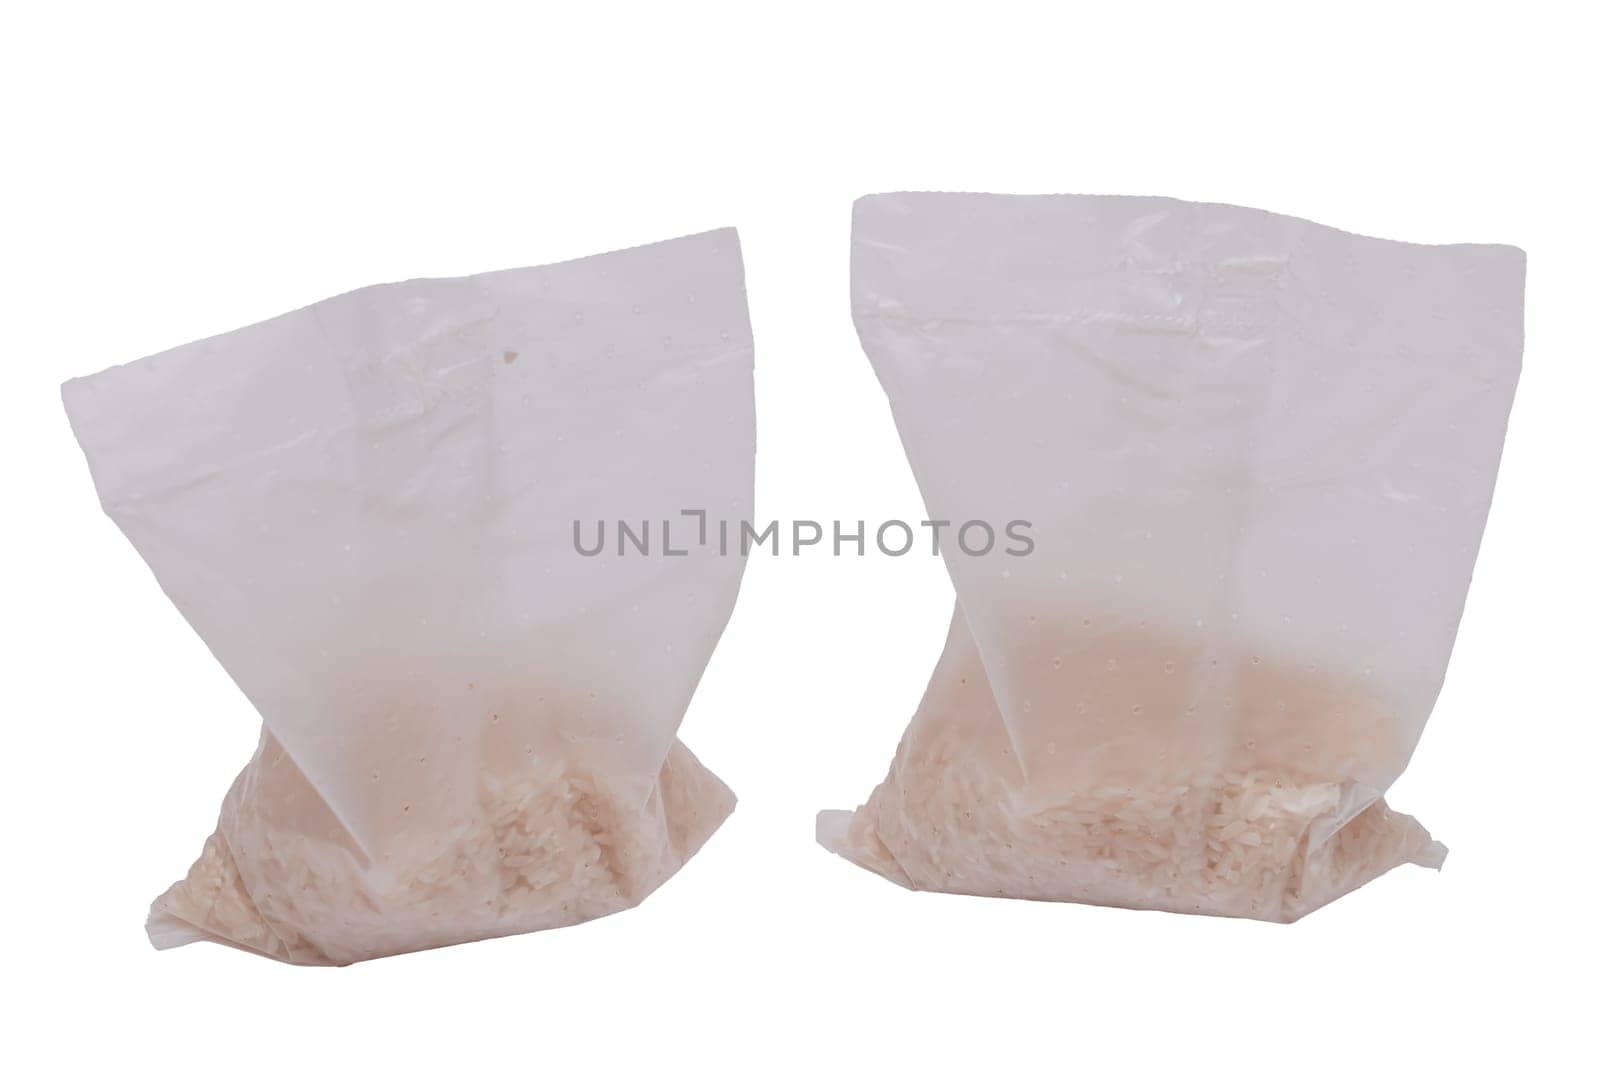 A Plastic Bags of White Long Grain Rice - Isolated on White Background. Small Transparent Packages with Dry Rice - Isolation